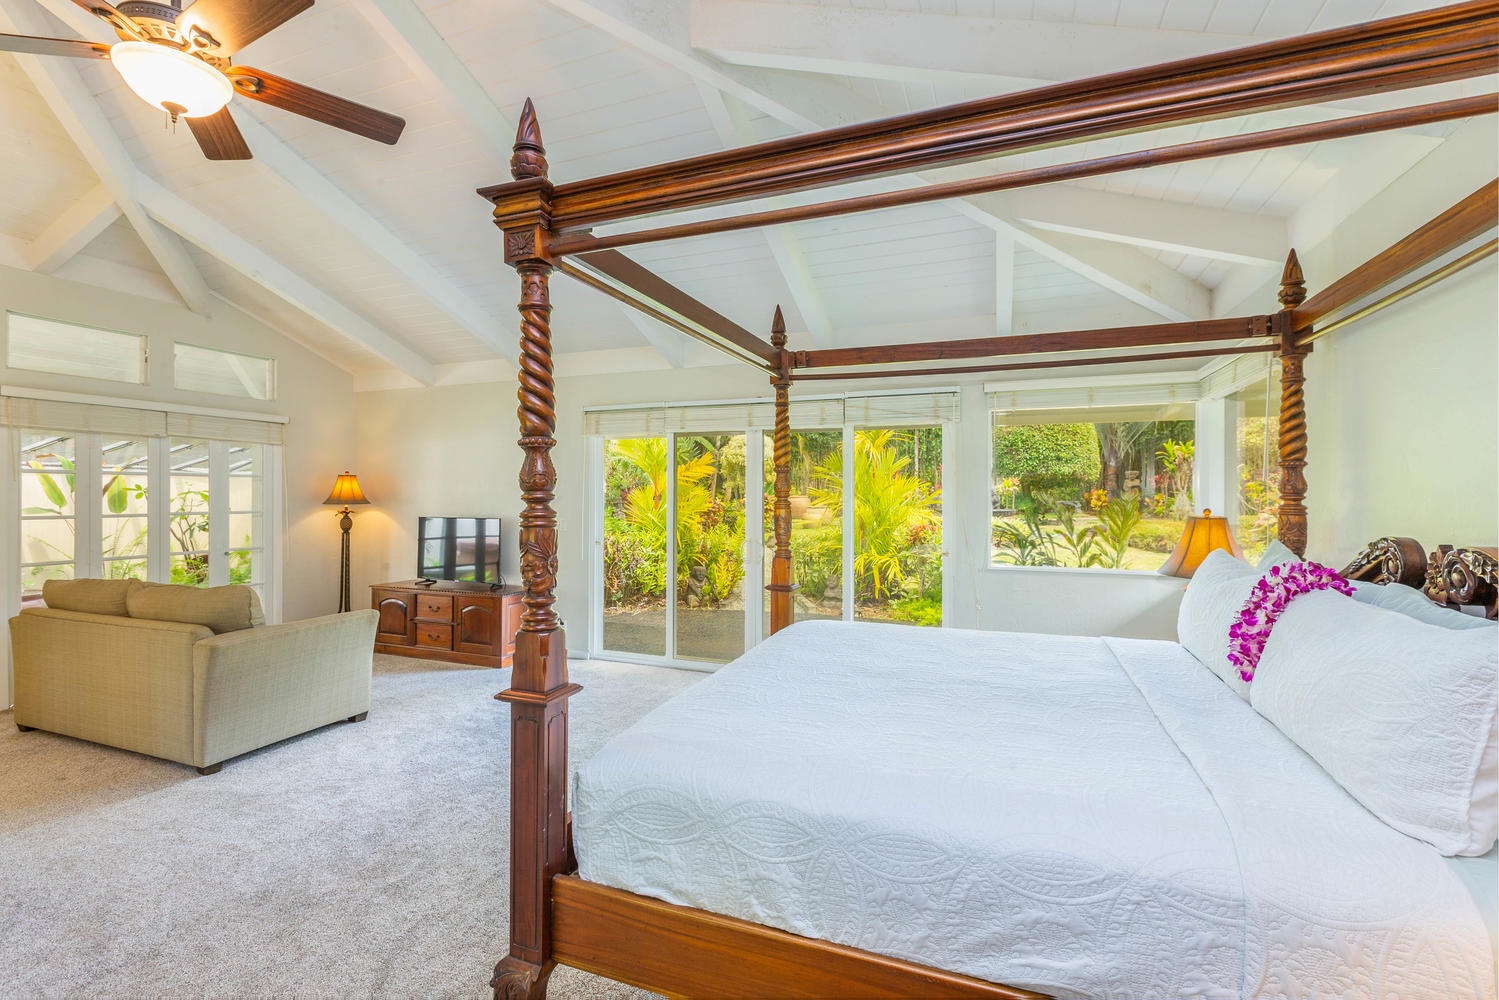 Princeville Vacation Rentals, Mala Hale - Slip into relaxation mode in the posh primary suite